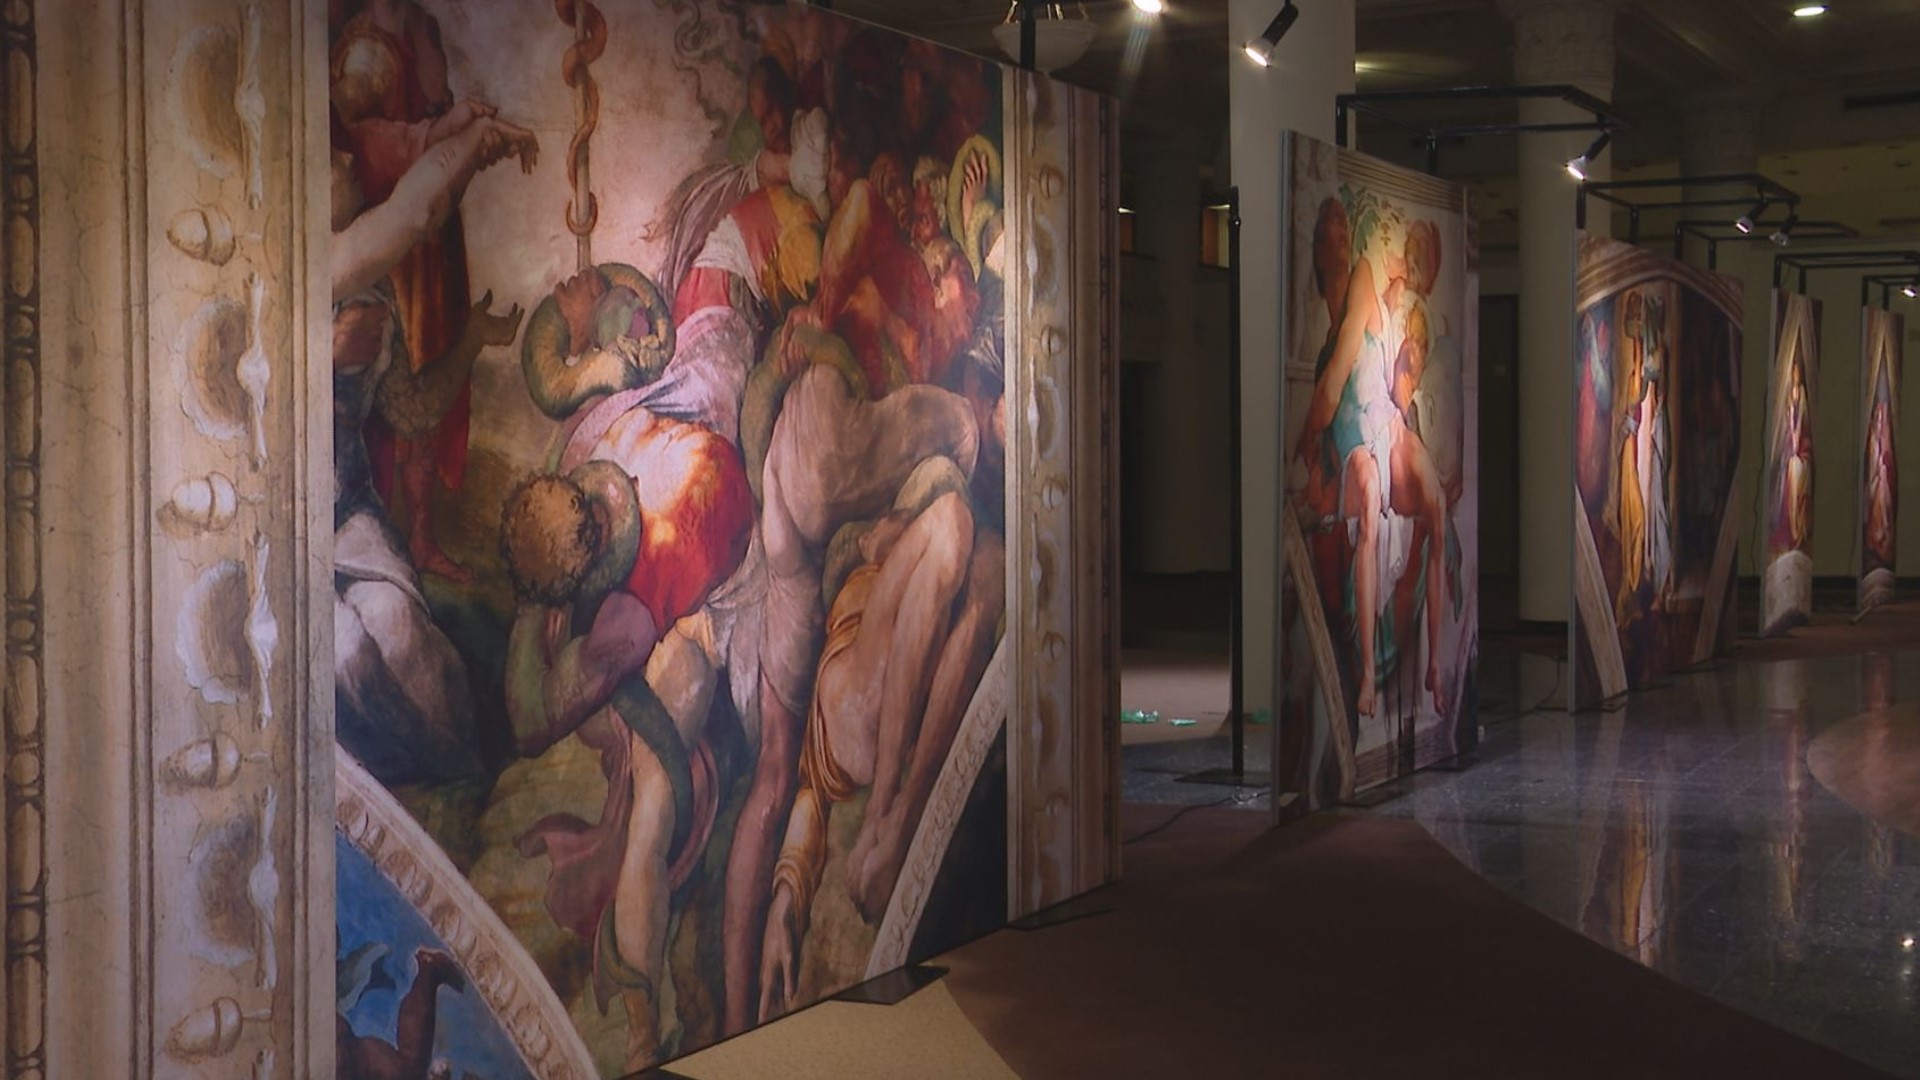 The exhibit has reproduced all 34 paintings that can be found in the Sistine Chapel and placed them at eye-level.